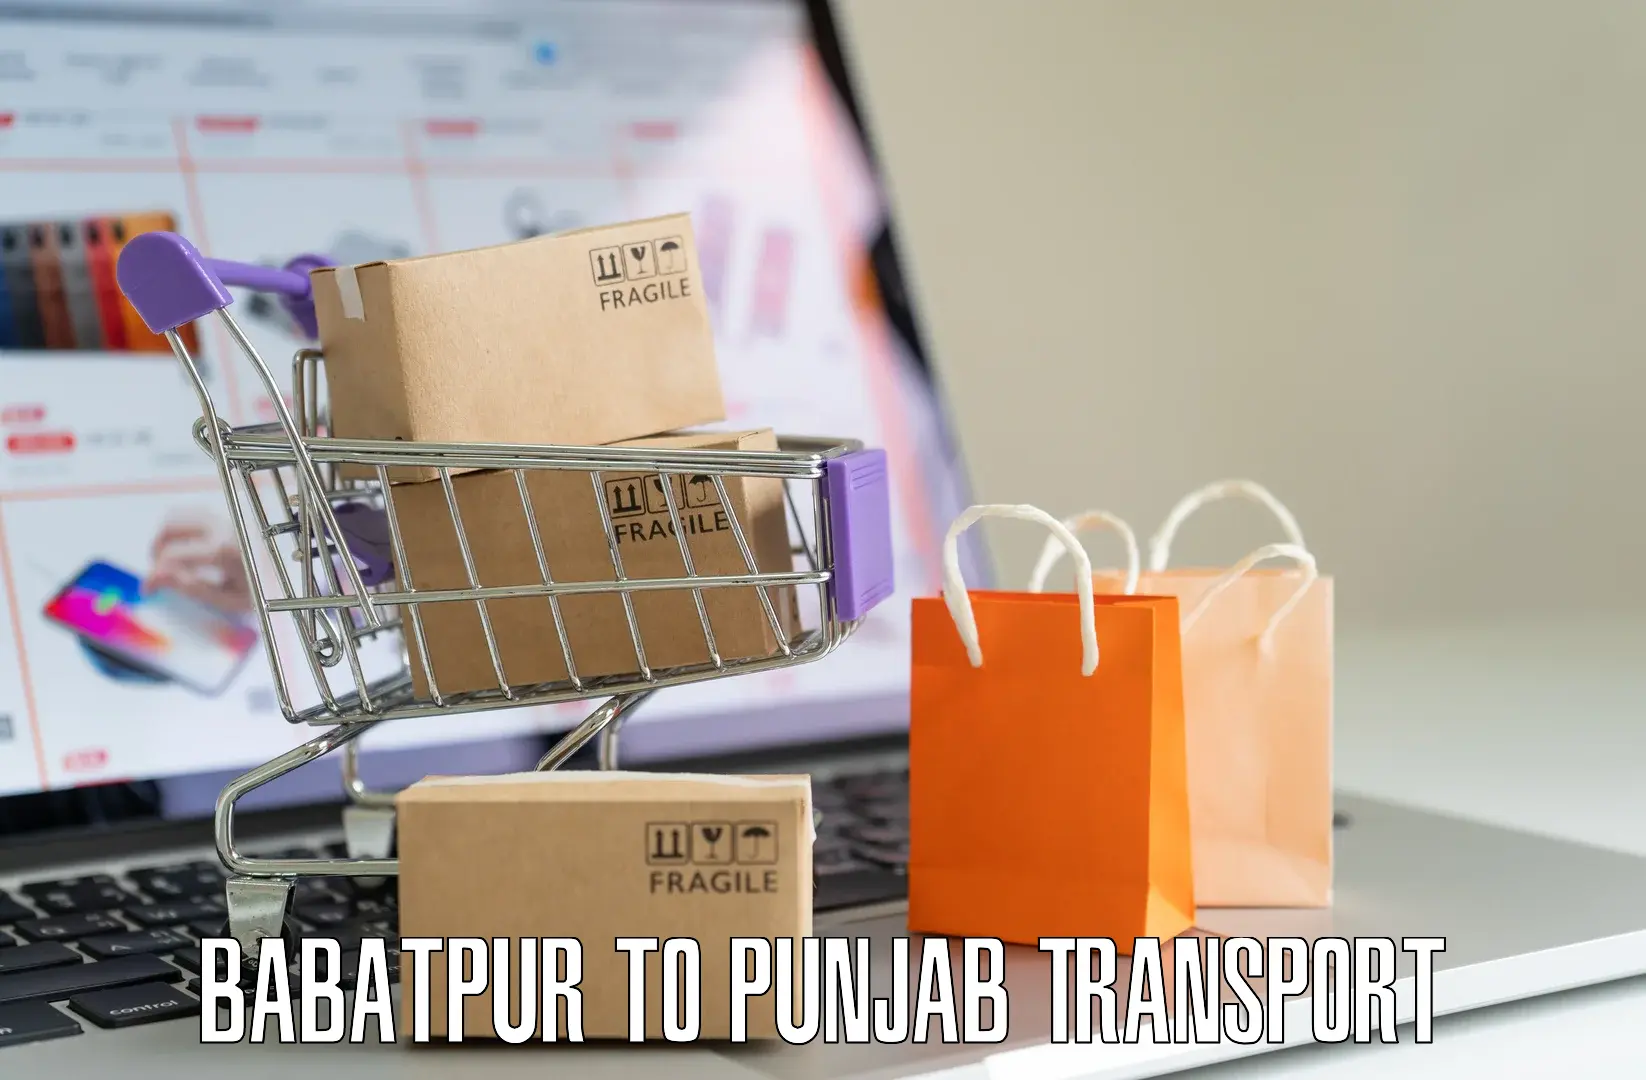 Transport bike from one state to another Babatpur to Gurdaspur